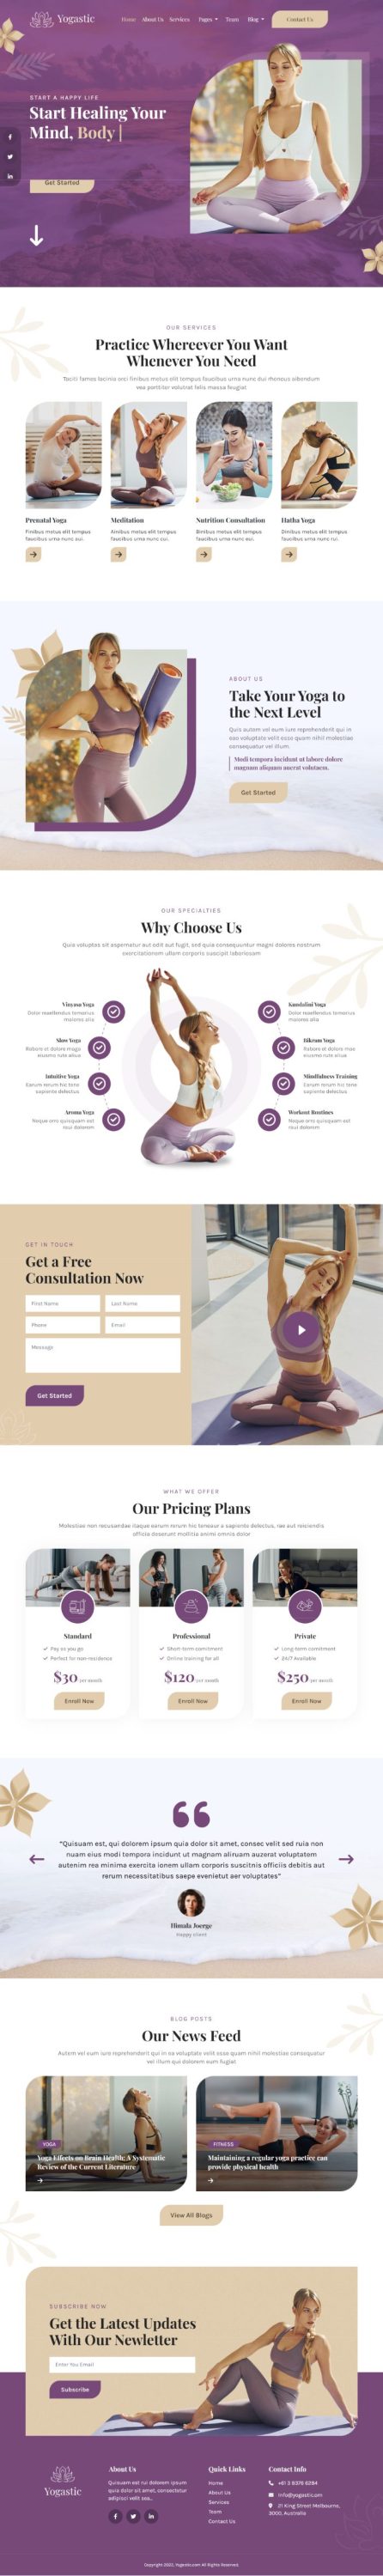 Mẫu website dịch vụ phòng tập gym - Fitness and gym 5